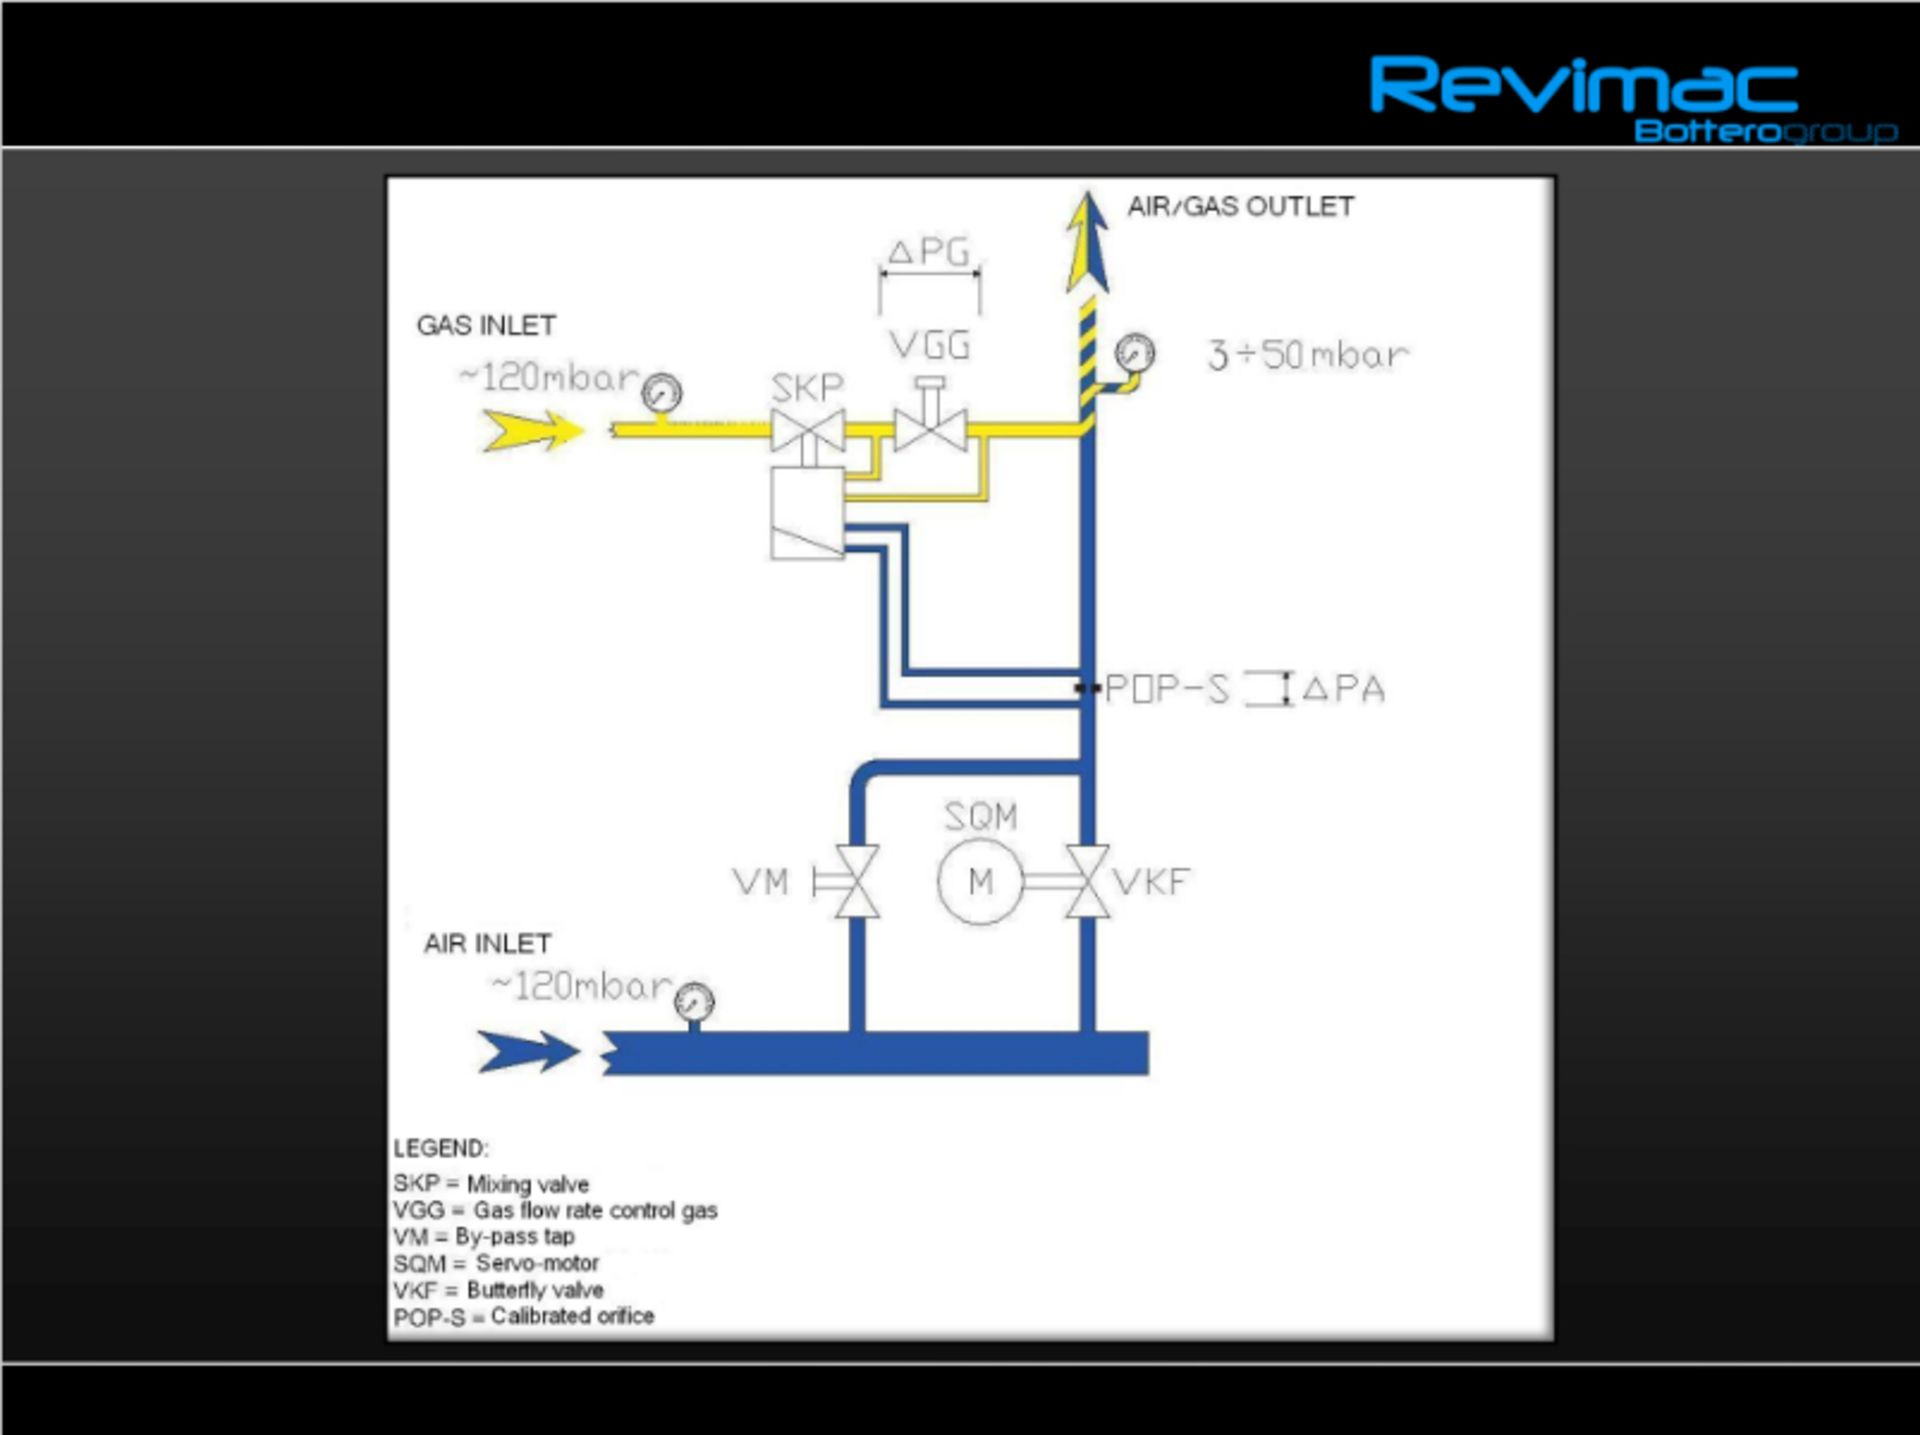 Revimac Forehearth Control System *Subject to Confirmation* - Image 16 of 18